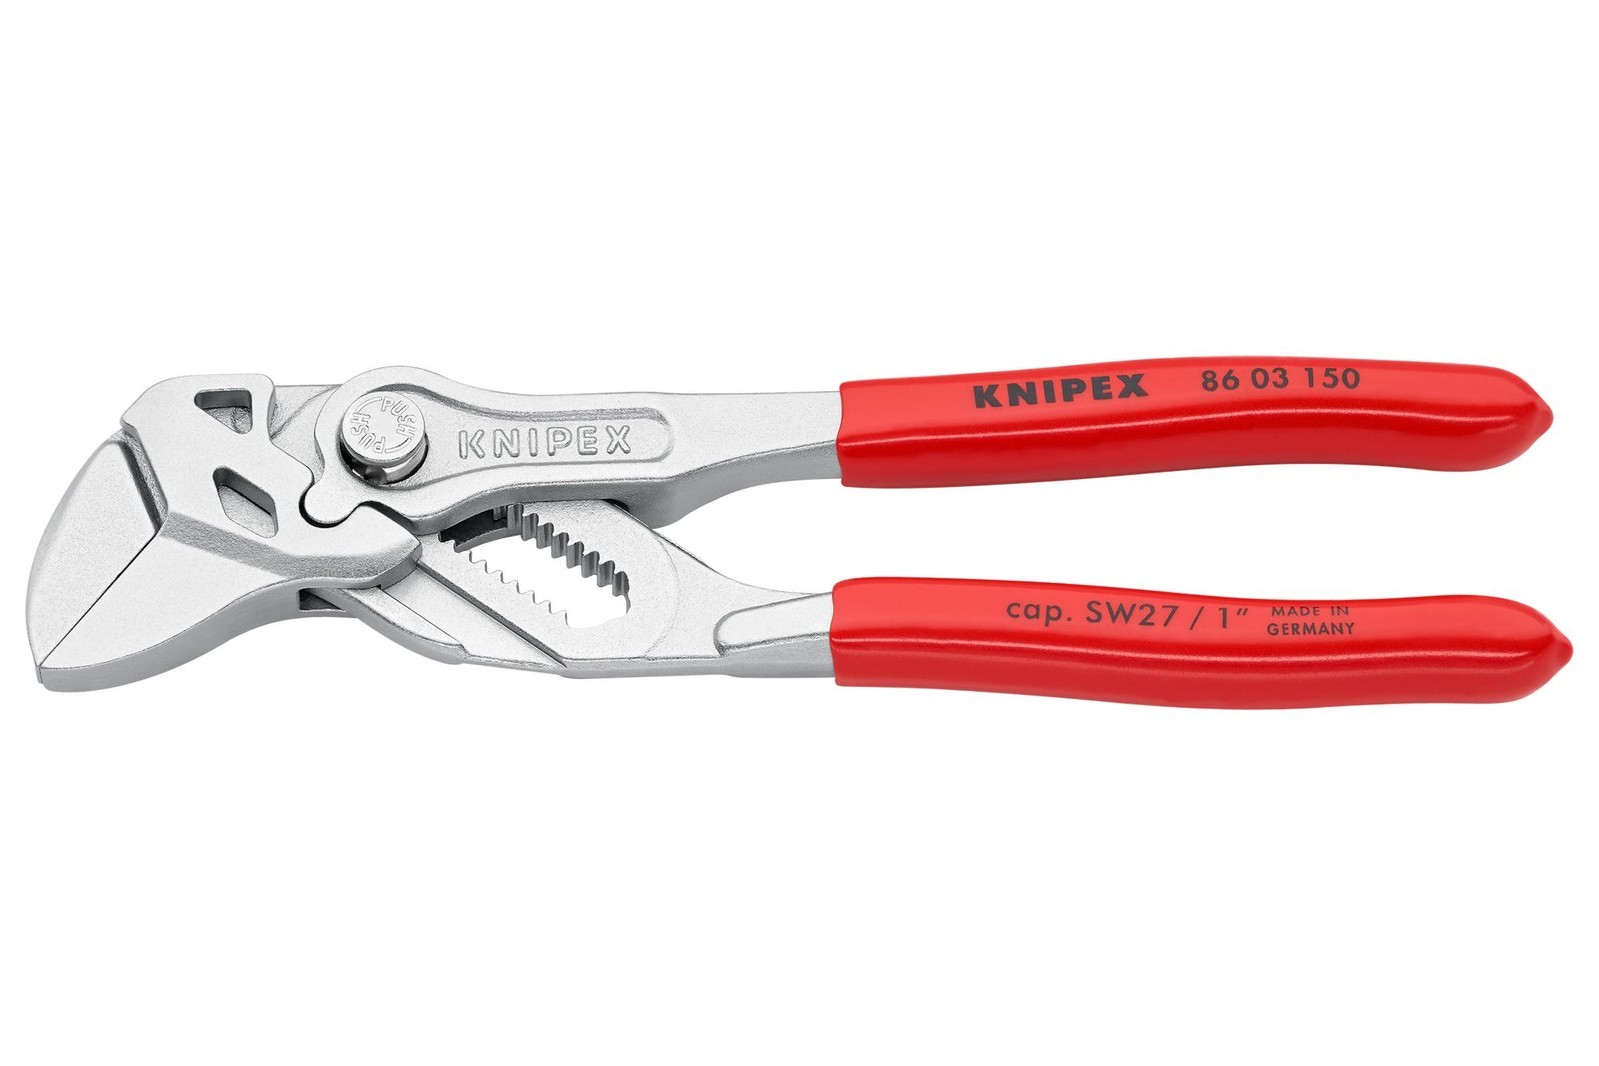 Knipex 86 03 150 Mini Plier Wrench, 150mm